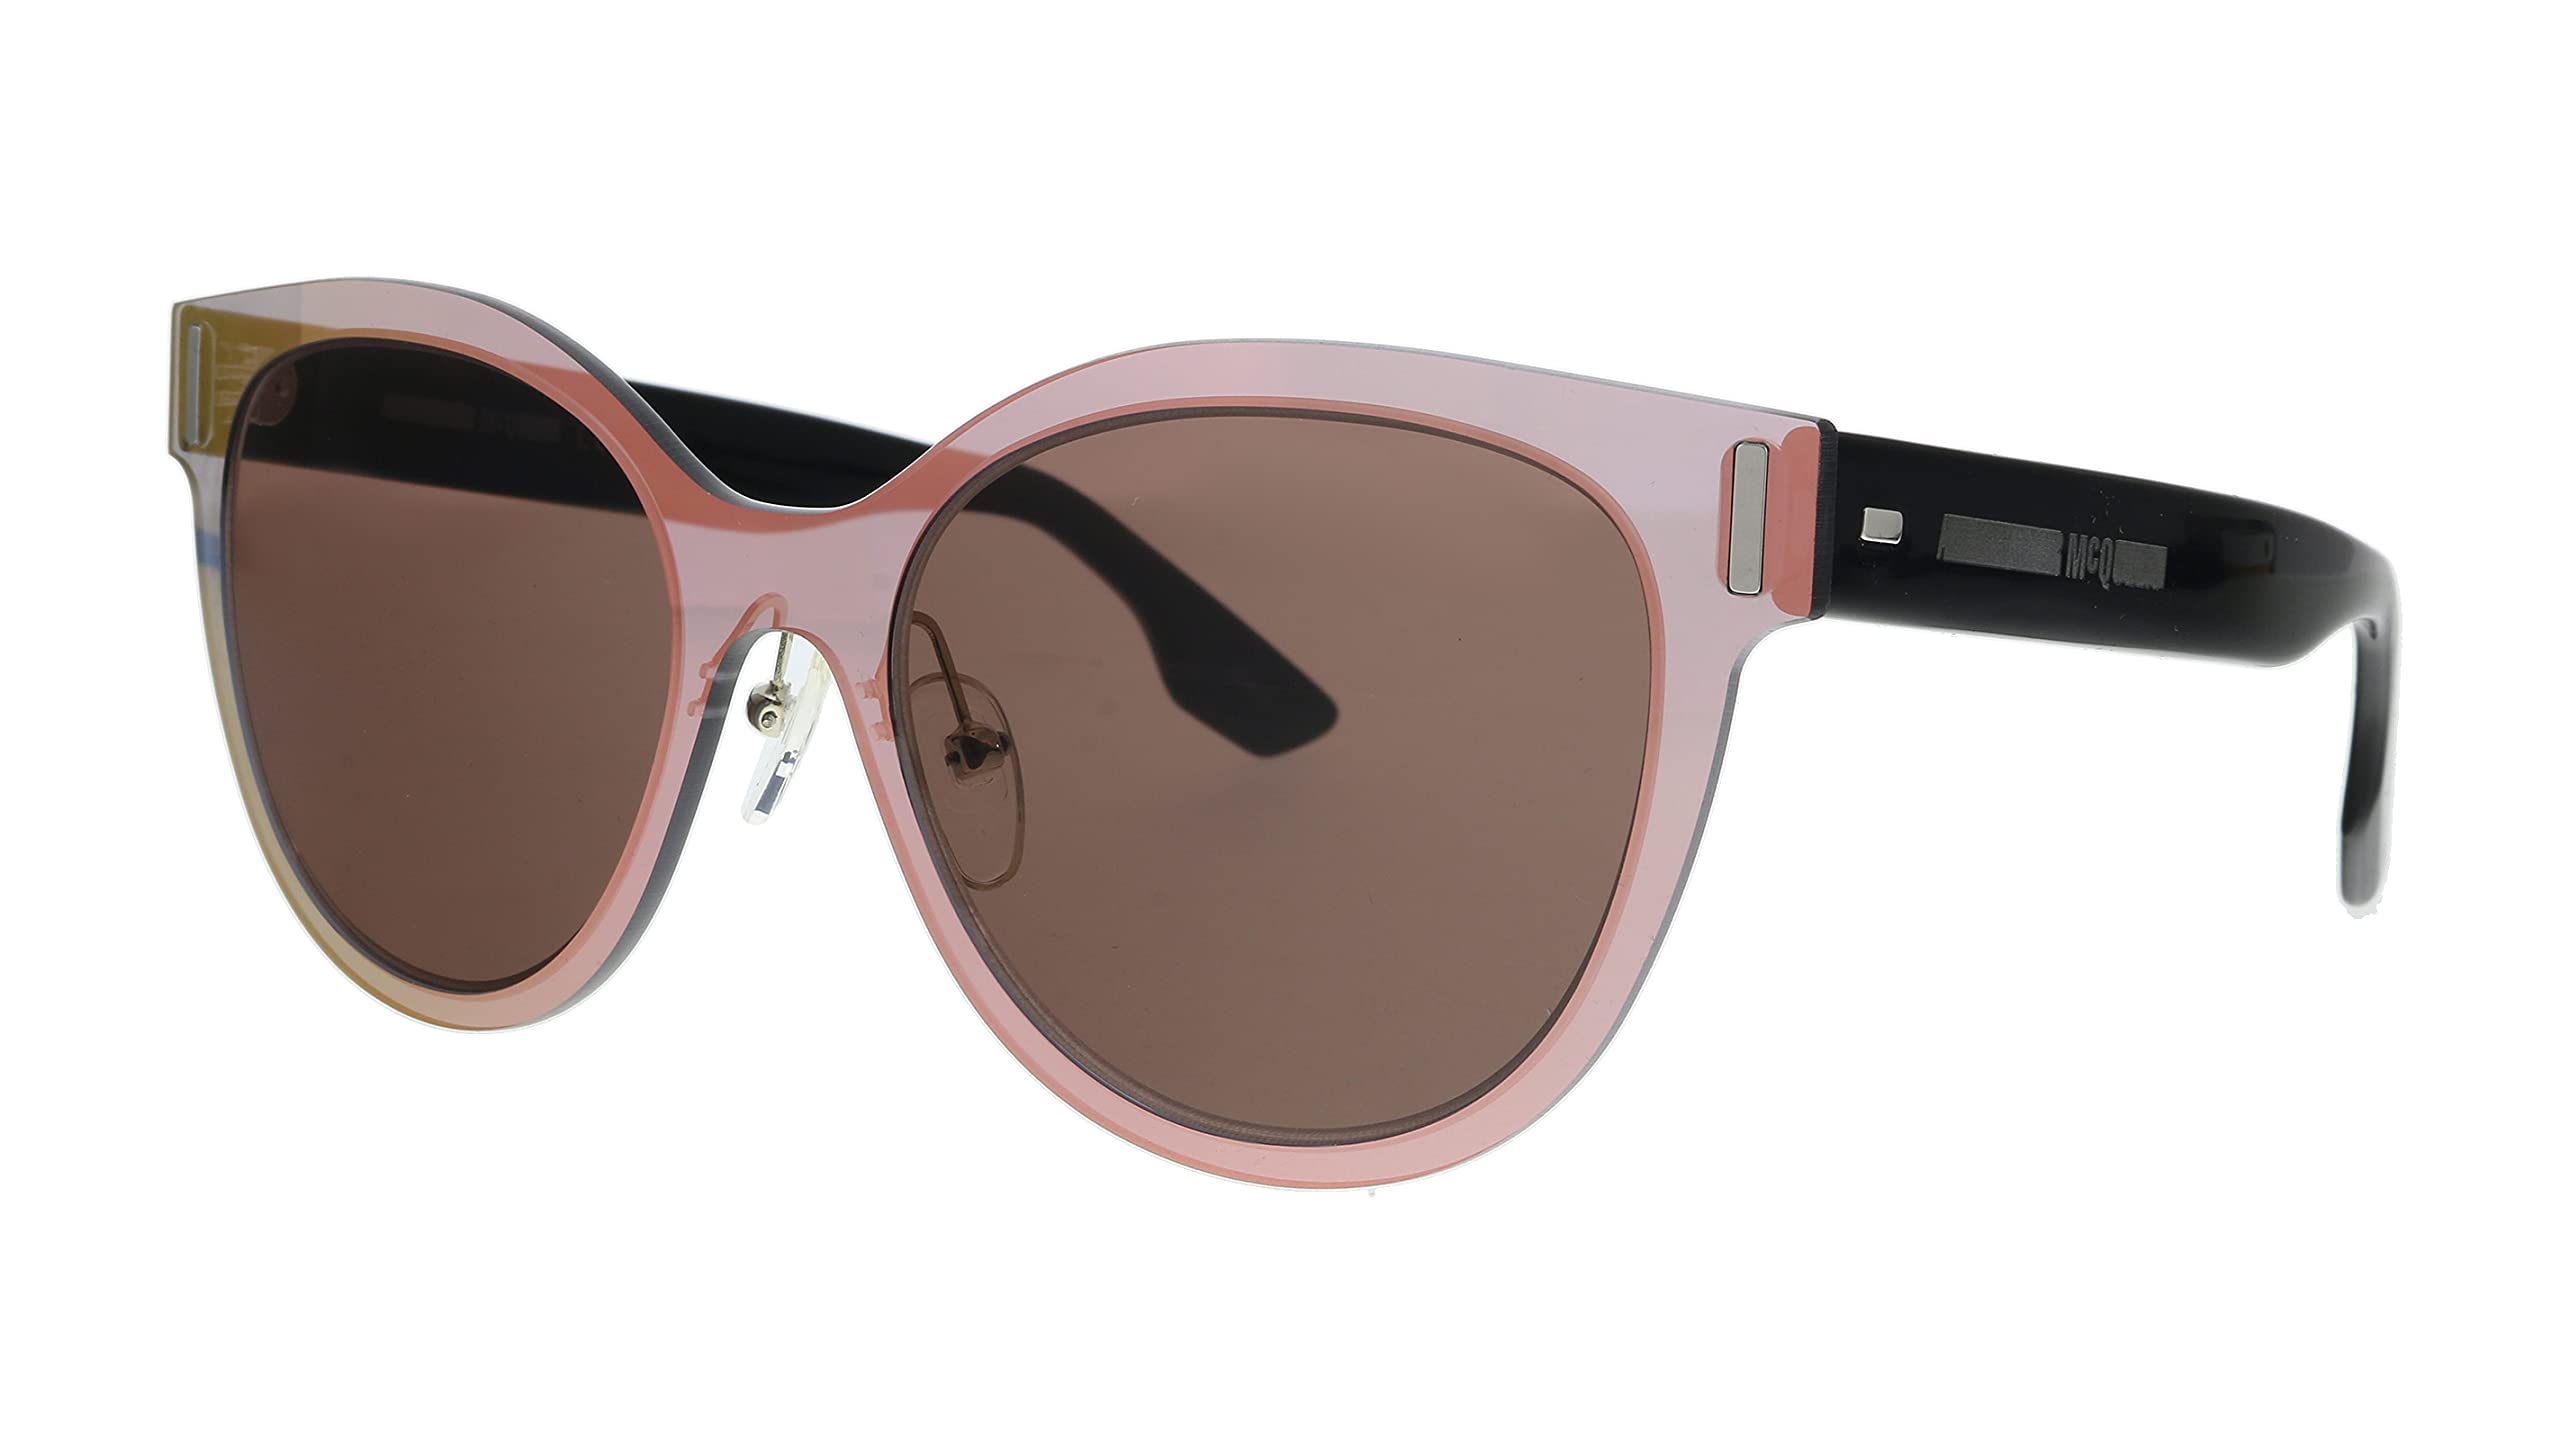 McQ 0023S 002 Pink/Black / Brown 0023S Round Sunglasses Lens Category 3 Lens